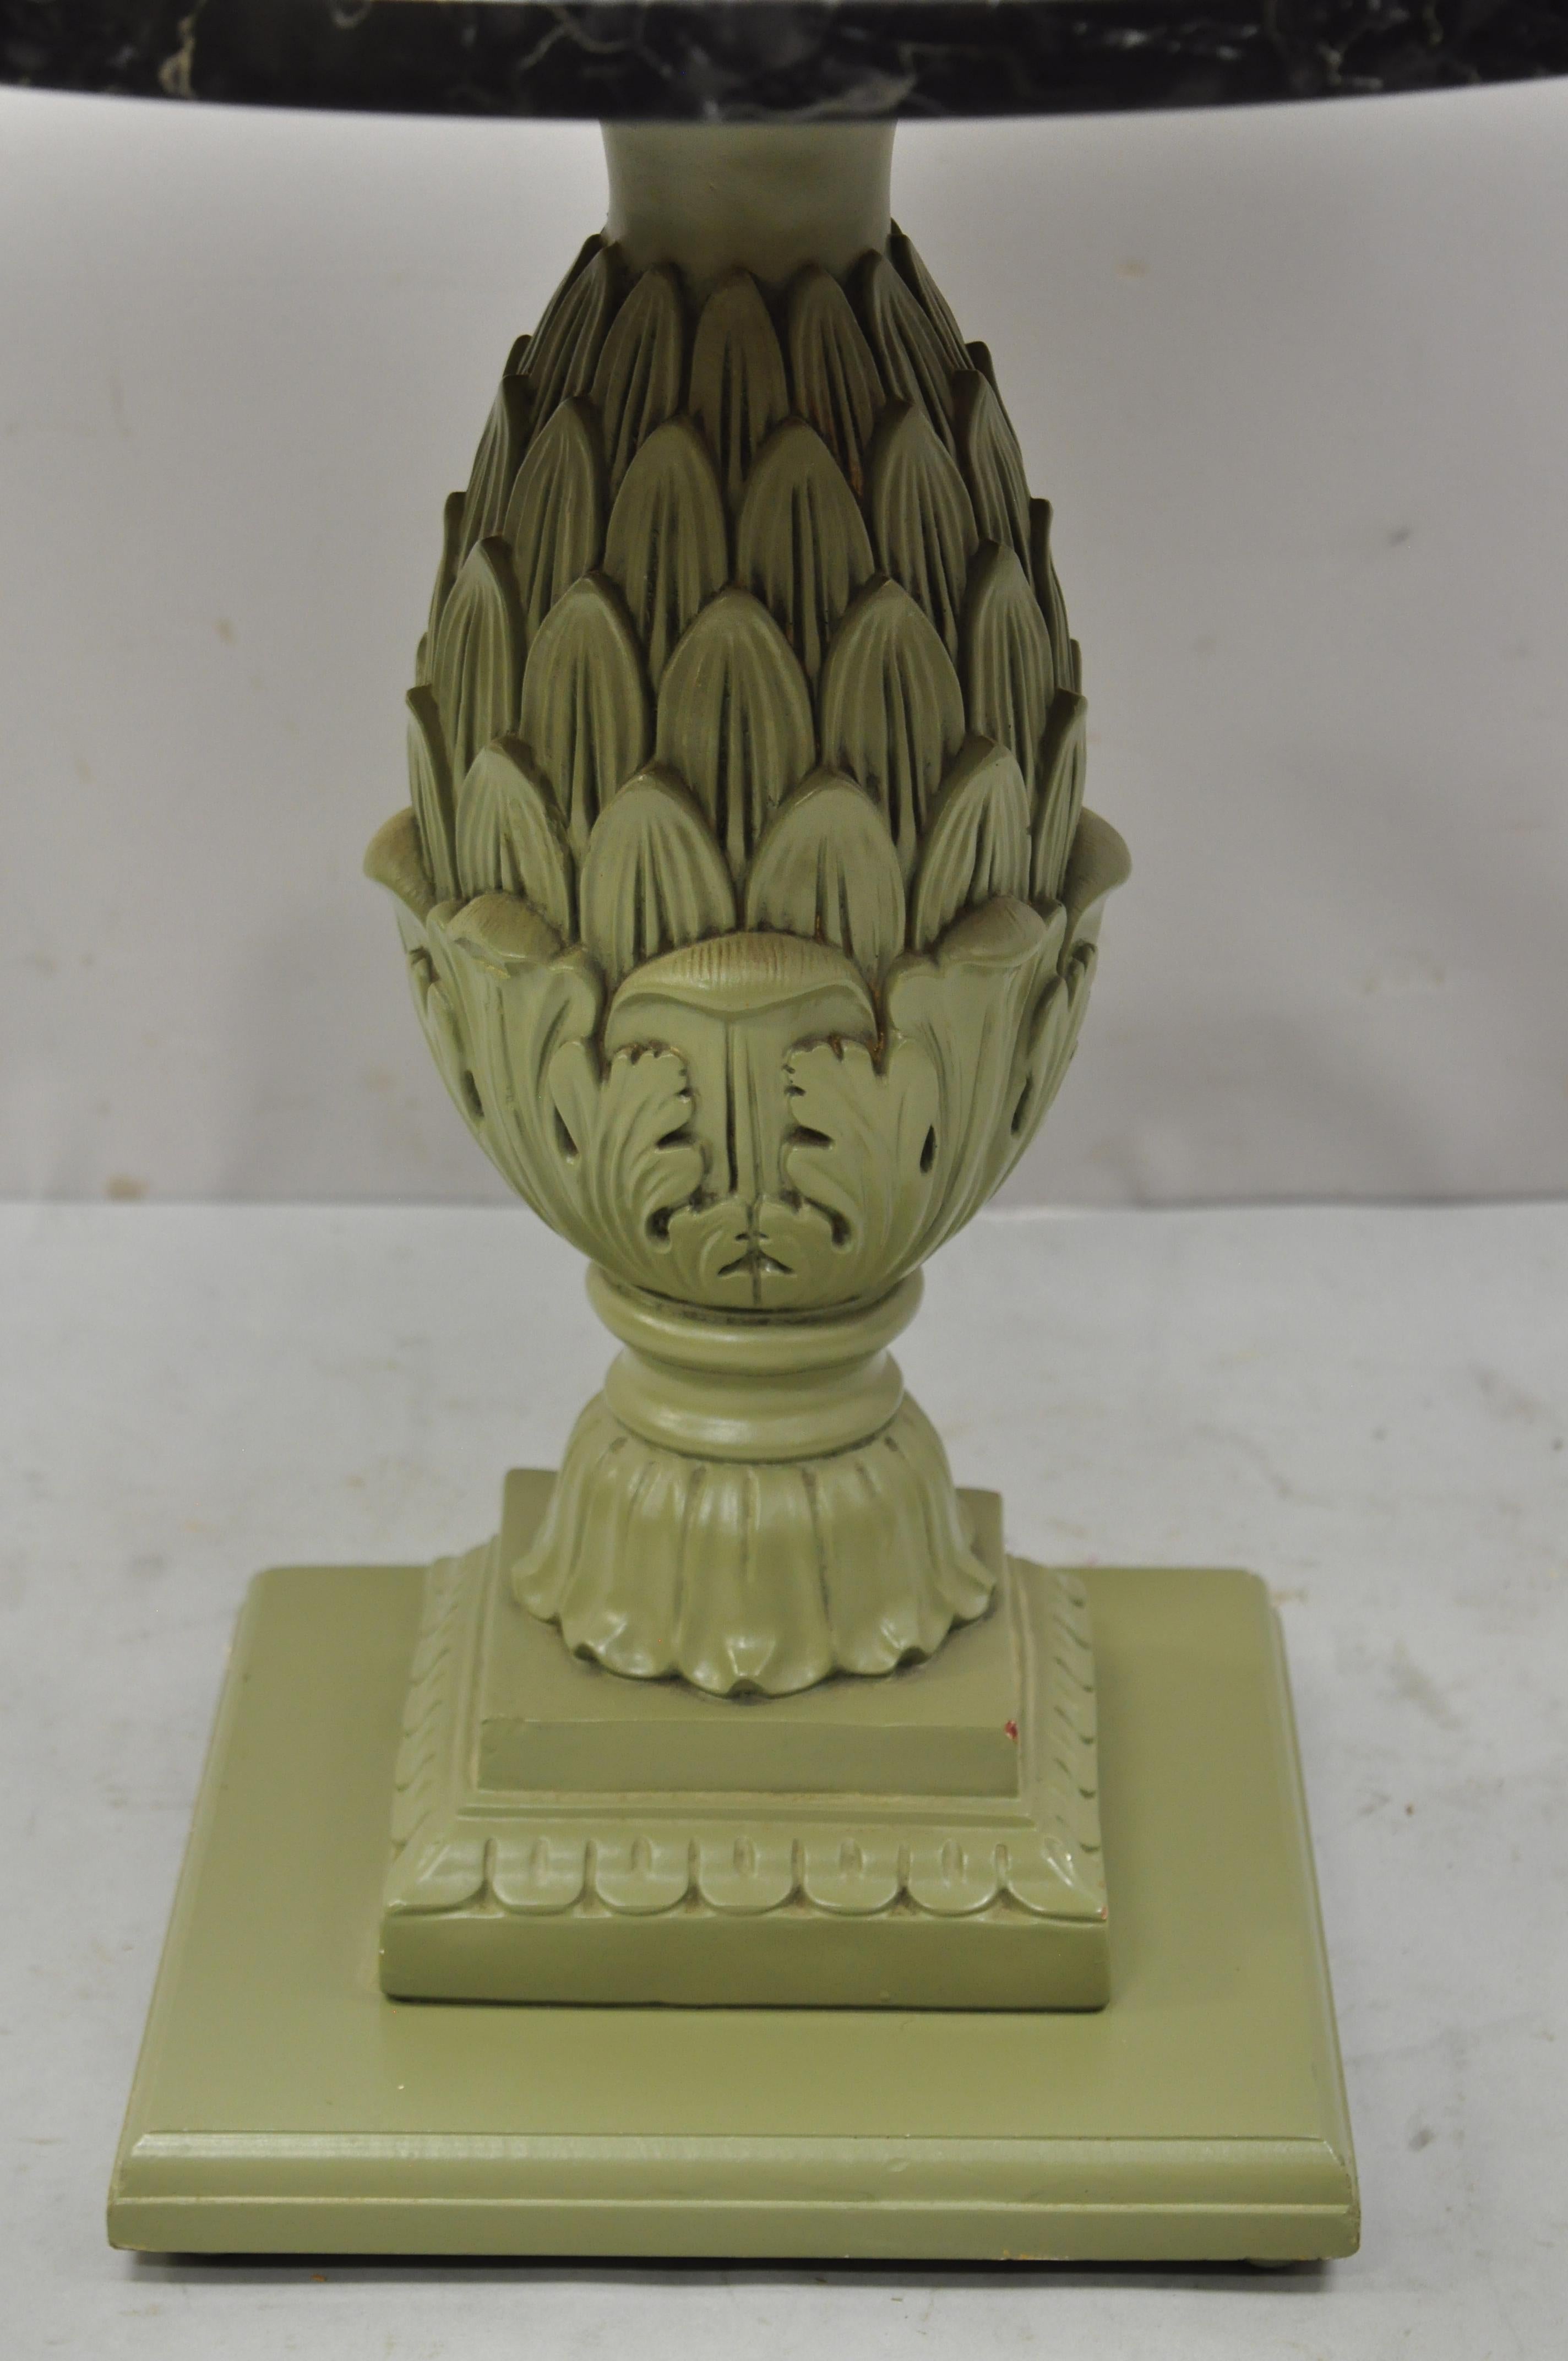 Italian Hollywood Regency green pineapple pedestal base round marble top accent side table. Item features round black marble top, solid carved wood artichoke/pineapple pedestal base with green painted finish, very nice vintage item, great style and